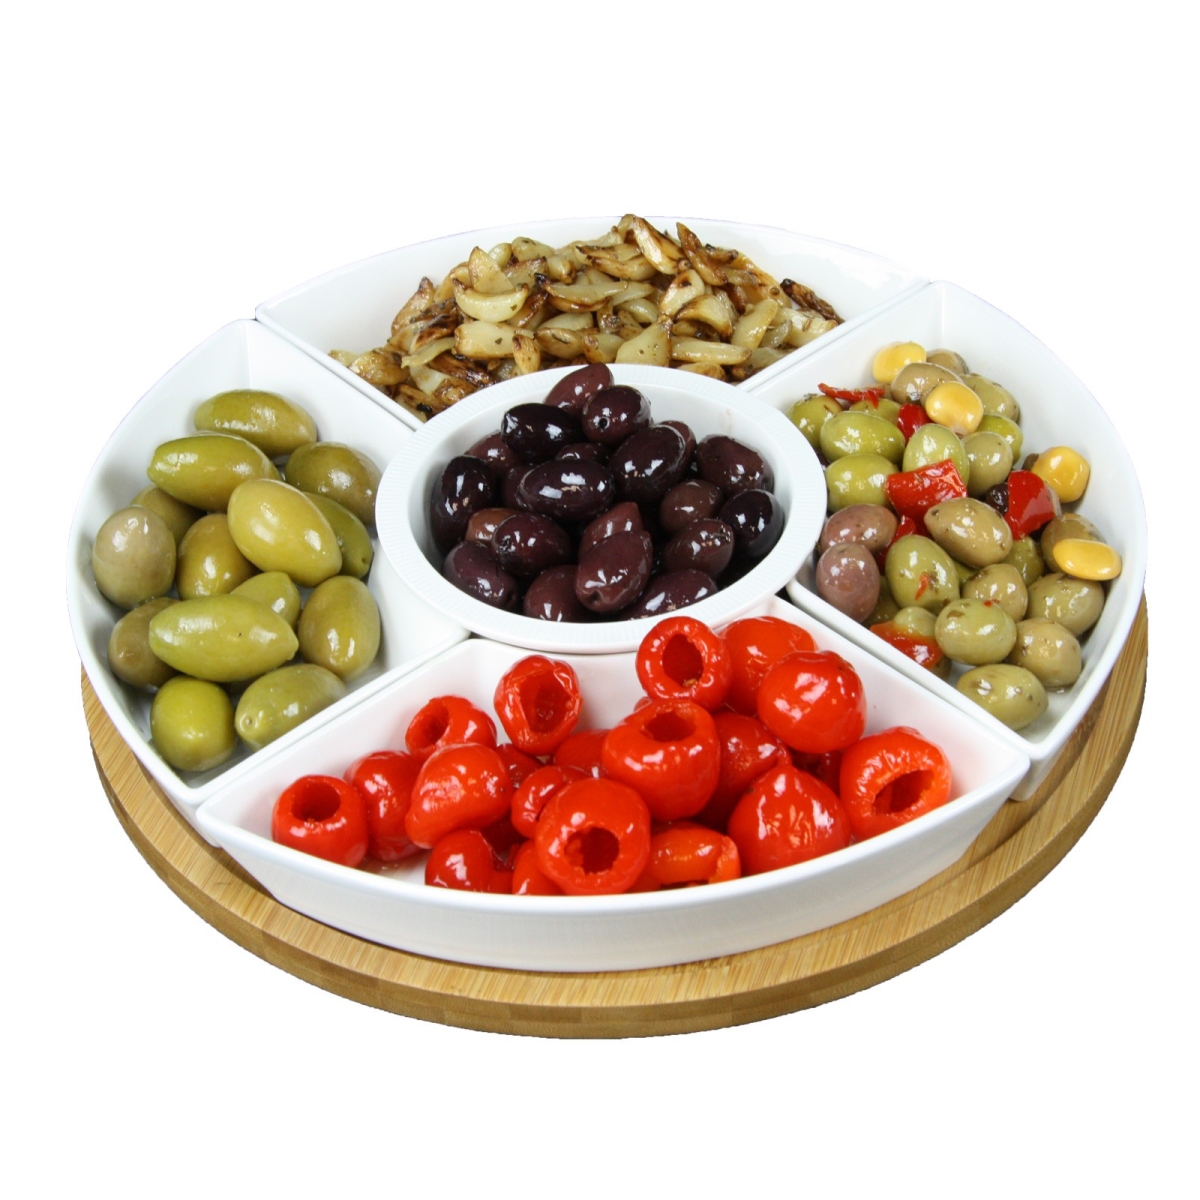 12.25 In. 6 Piece Lazy Susan Appetizer & Condiment Server Set With 5 Serving Dishes & A Bamboo Lazy Suzan Serving Tray